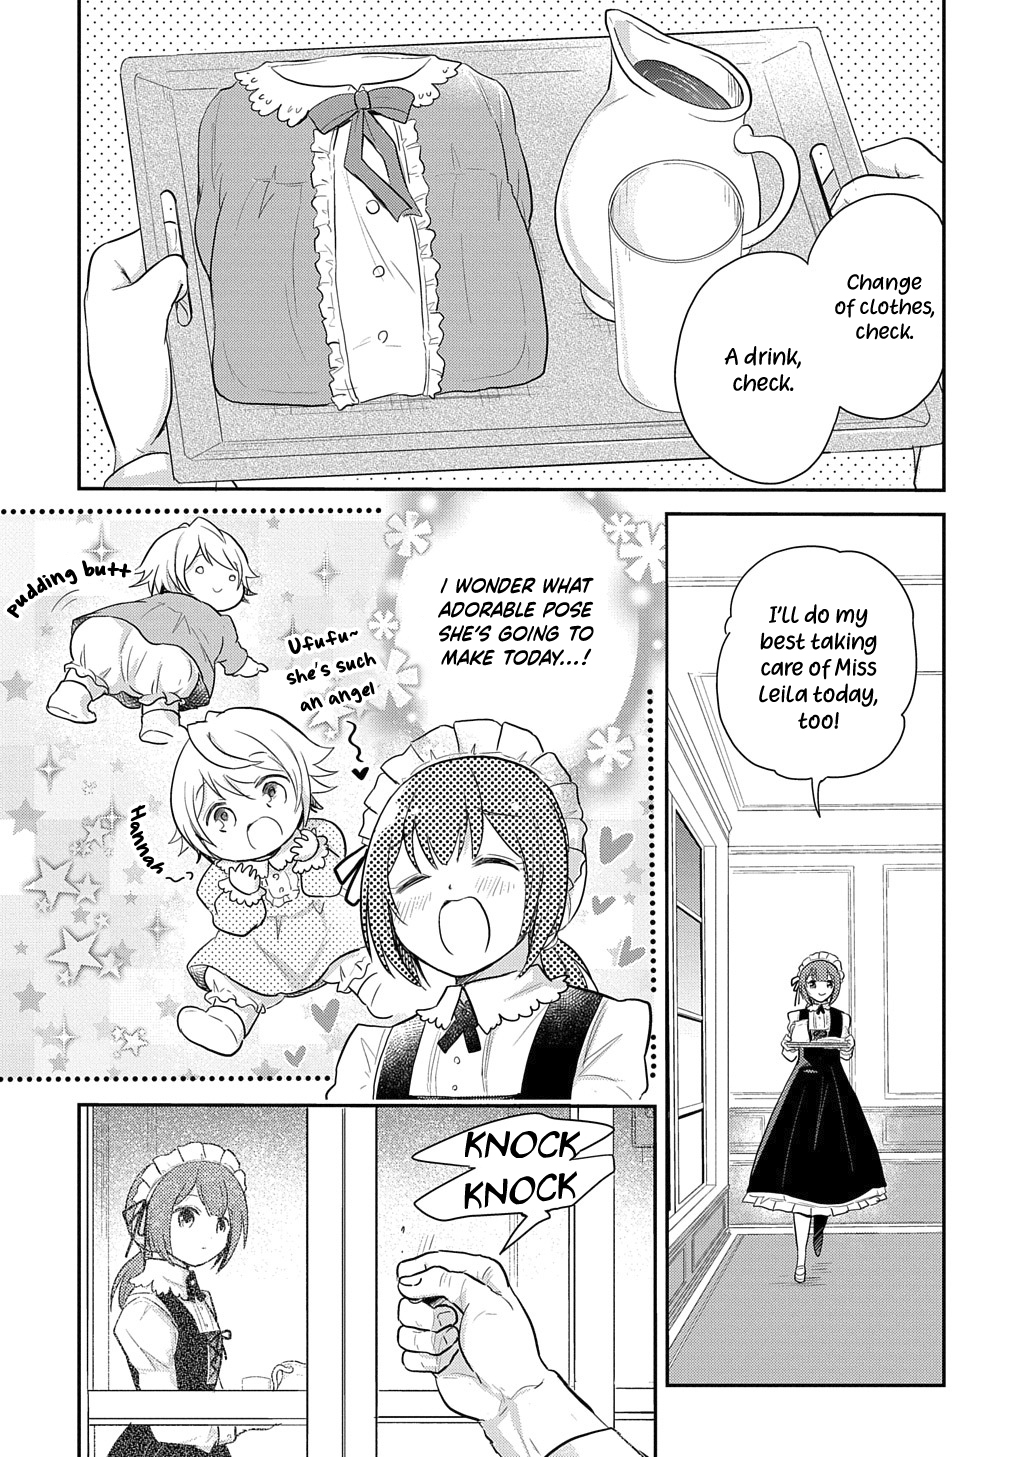 The Reborn Little Girl Won&rsquo;t Give Up - Page 1